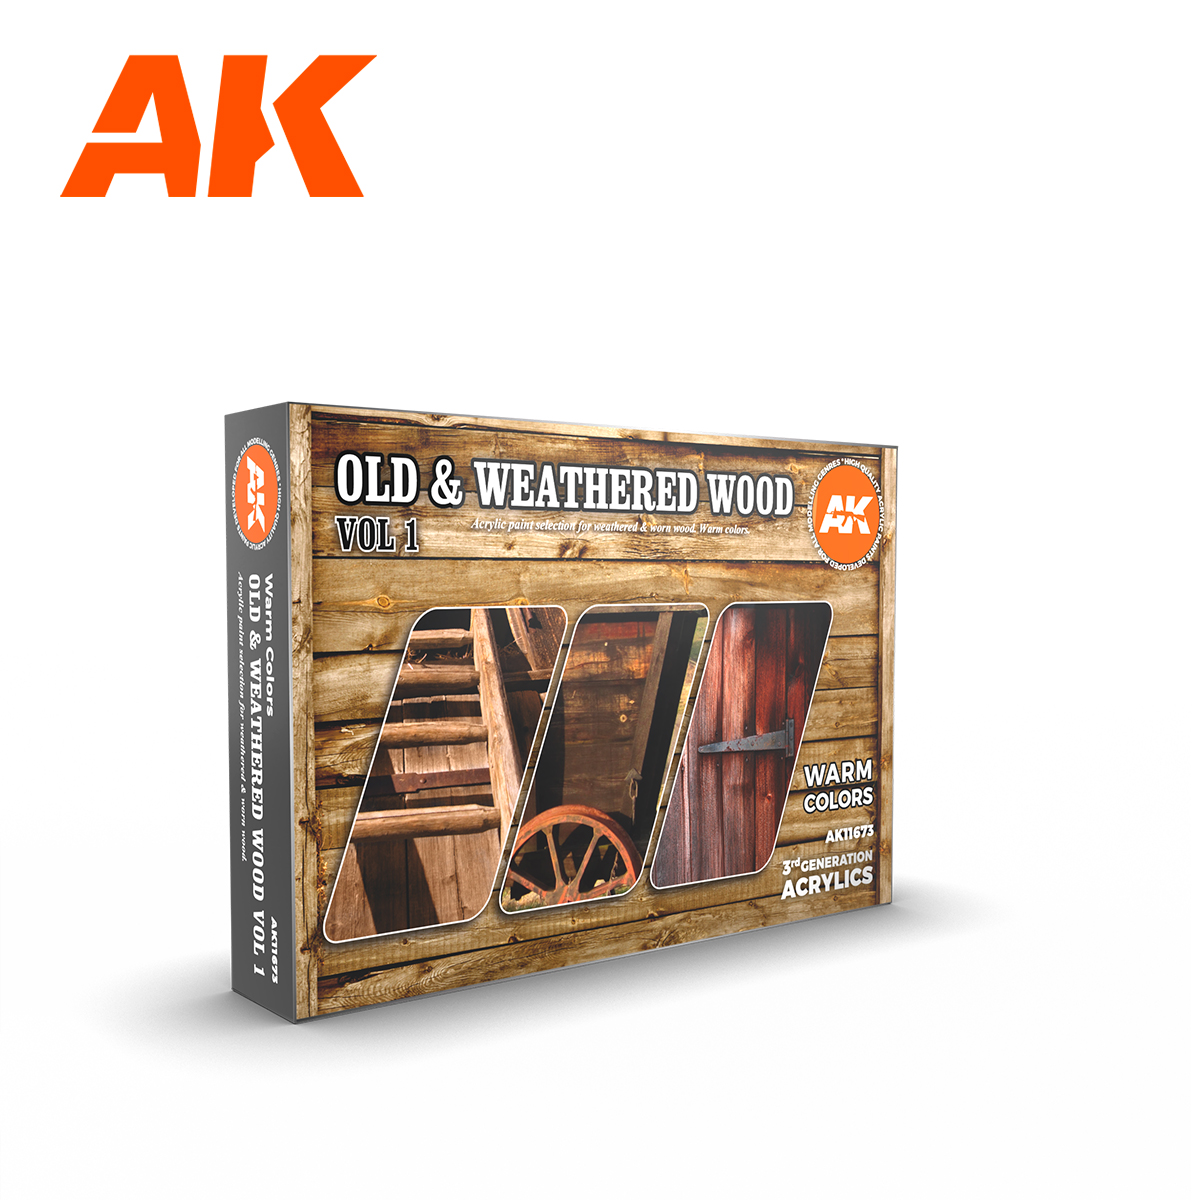 Buy OLD & WEATHERED WOOD VOL 1 online for 16,50€